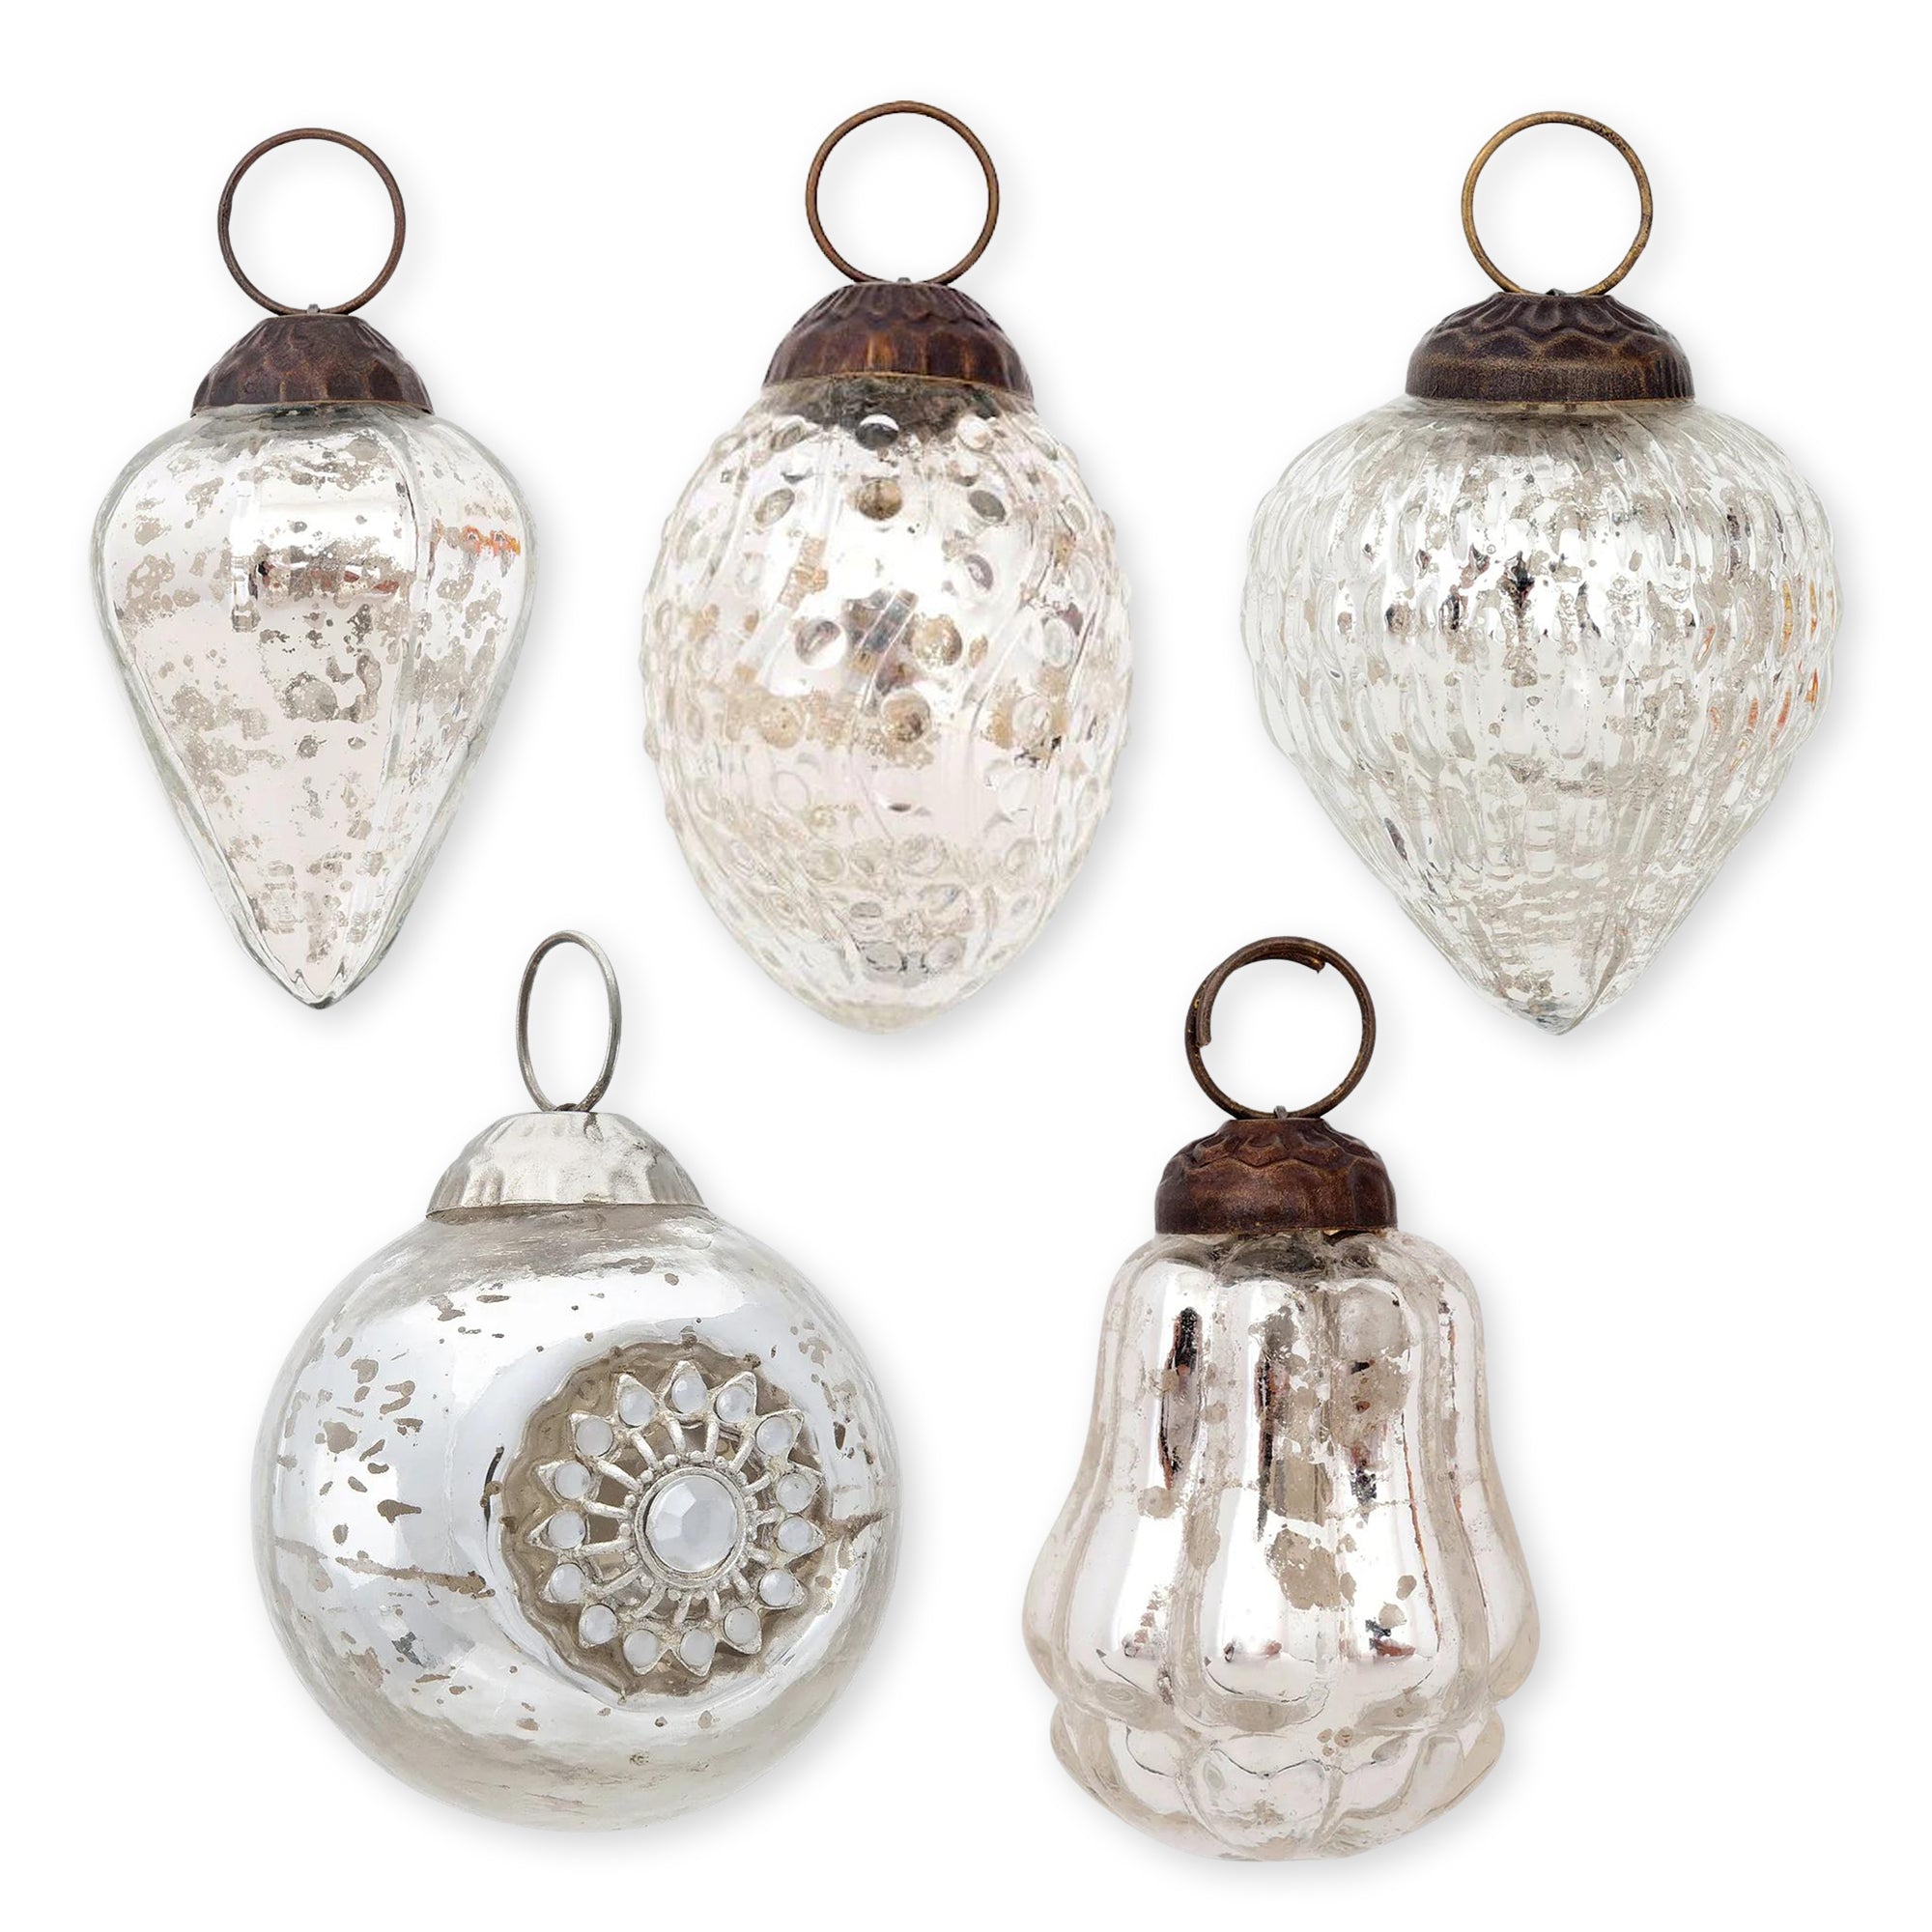 BLOWOUT 5 Pack | Silver Vintage Assorted Ornaments Set - Great Gift Idea, Vintage-Style Decorations for Christmas, Special Occasions, Home Decor and Parties